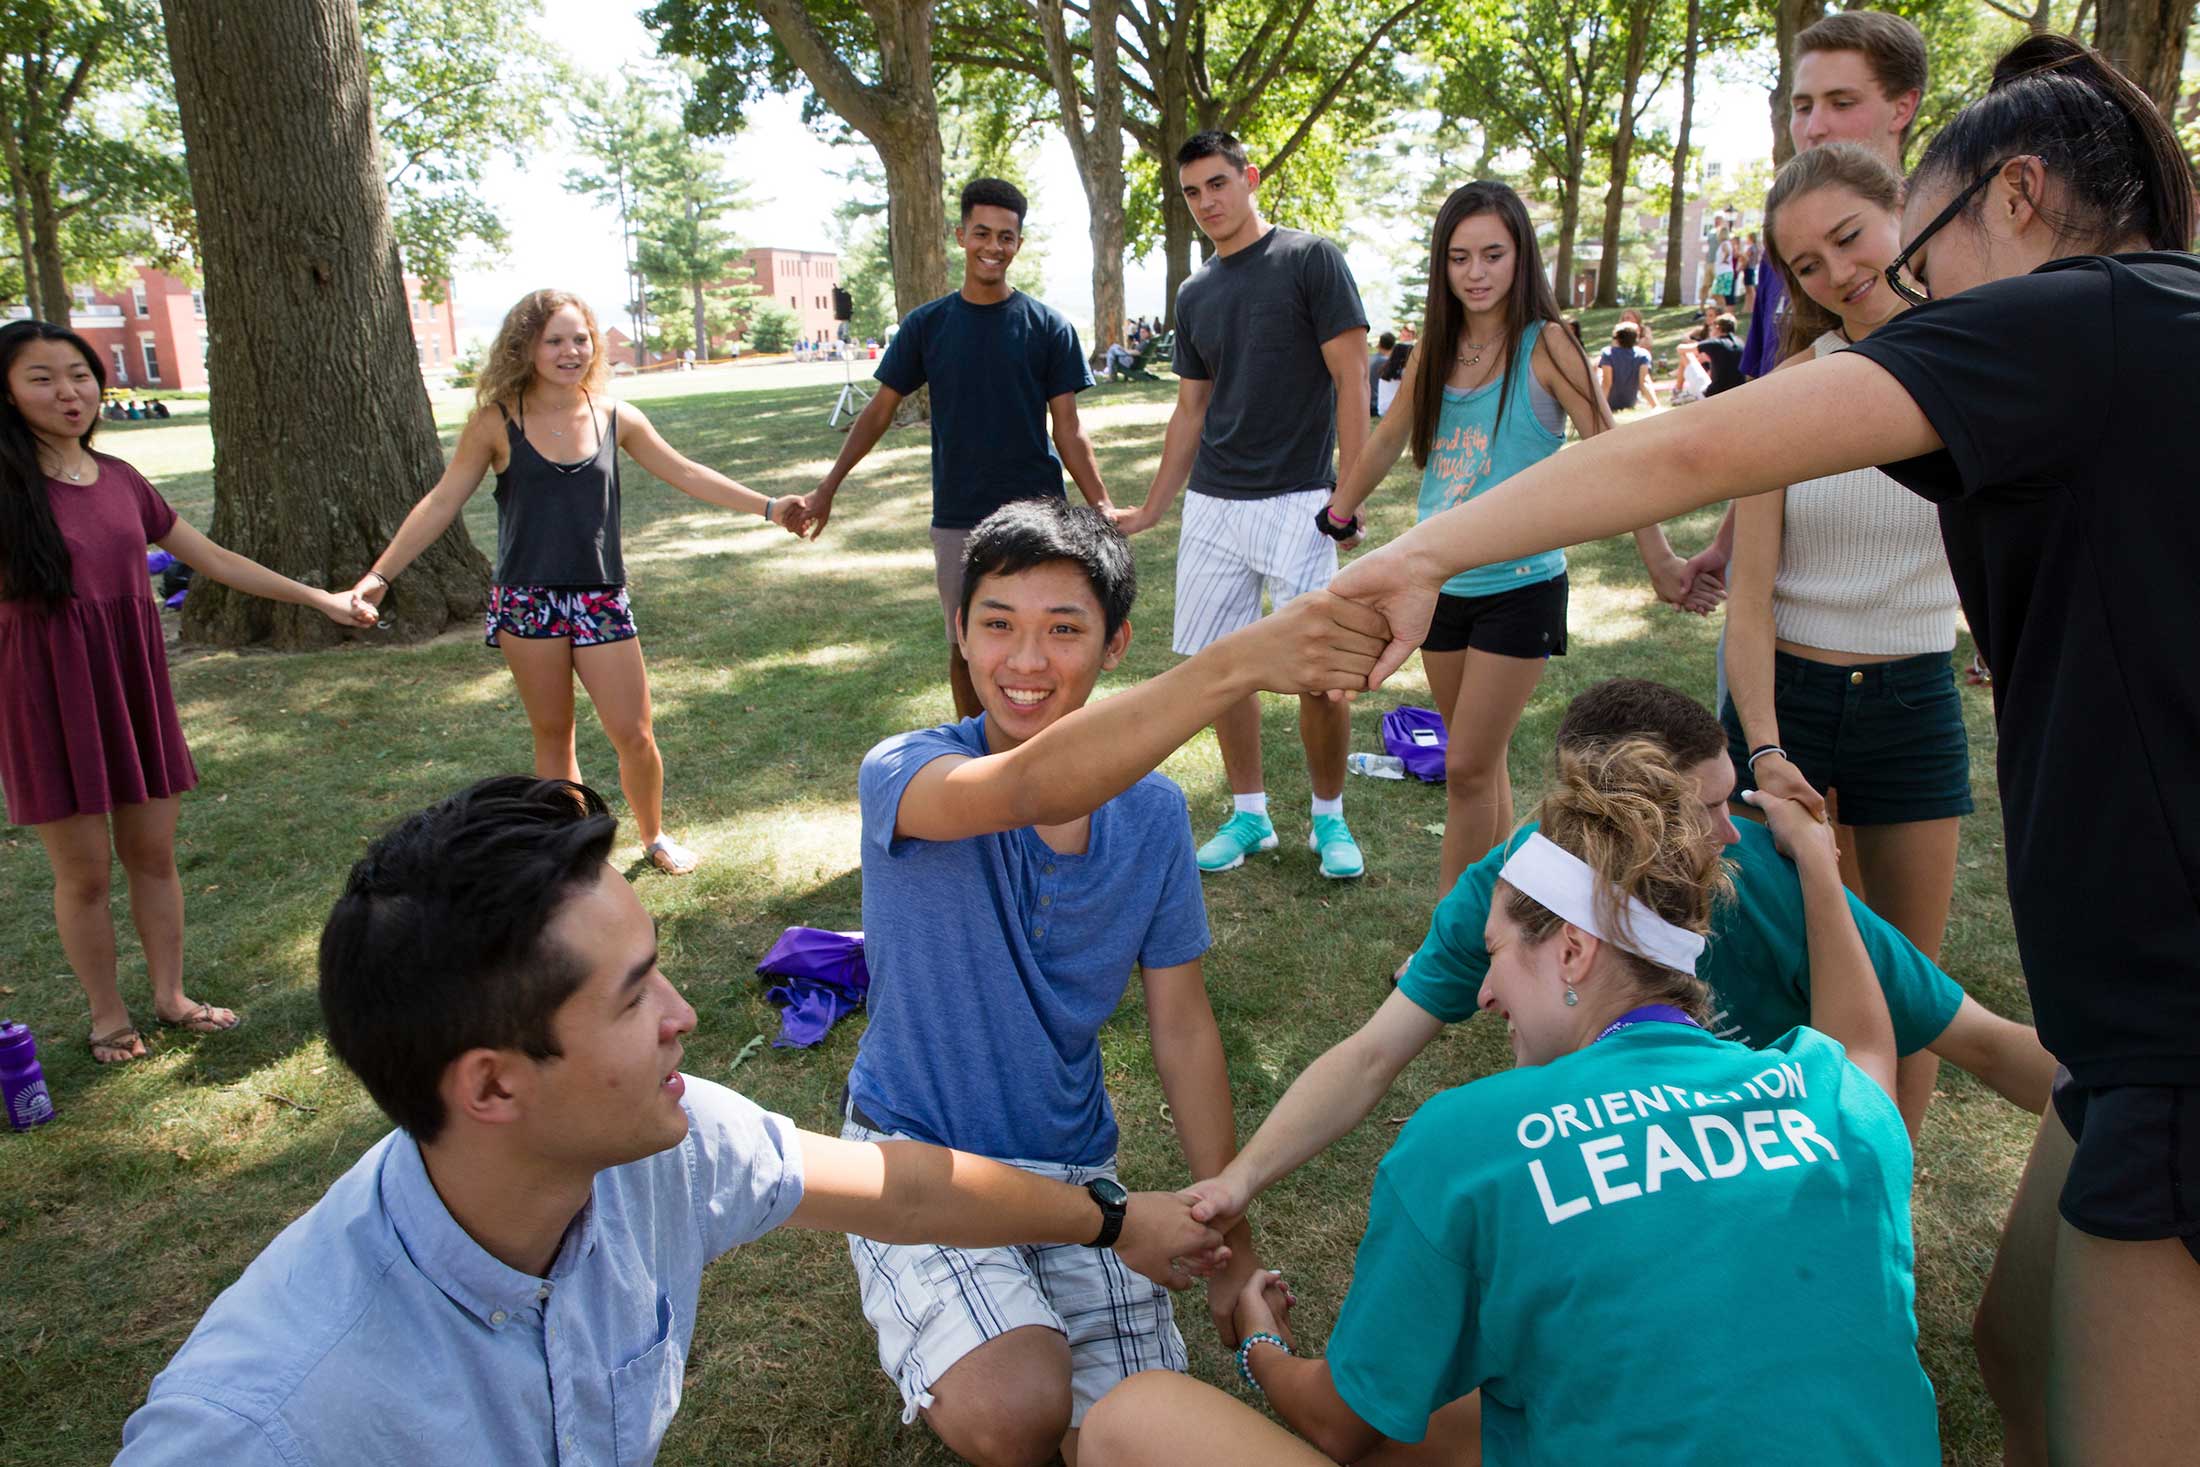 Students participating in an ice-breaker activity during orientation